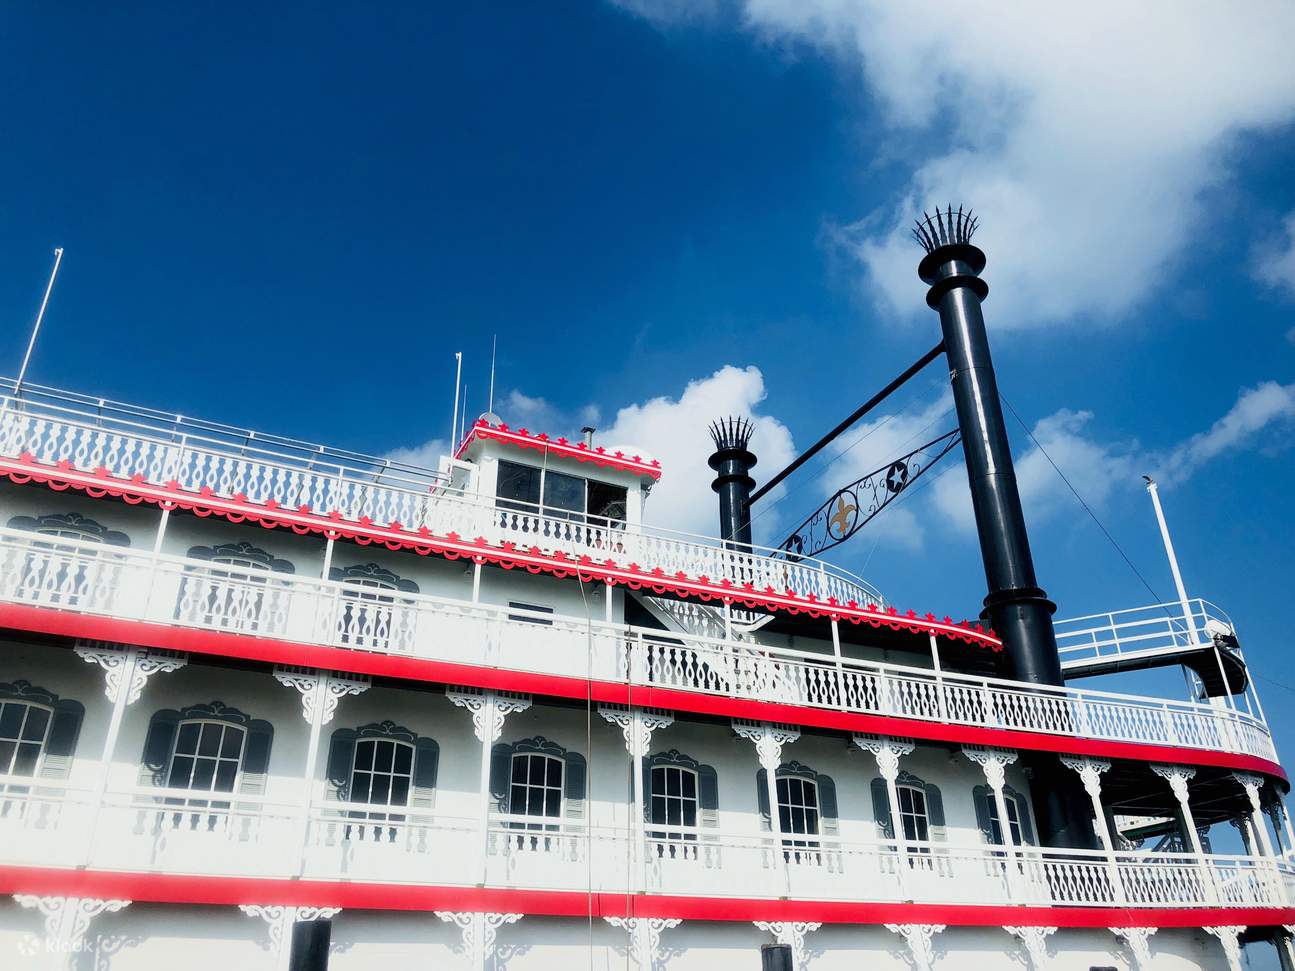 riverboat dinner cruises in new orleans la